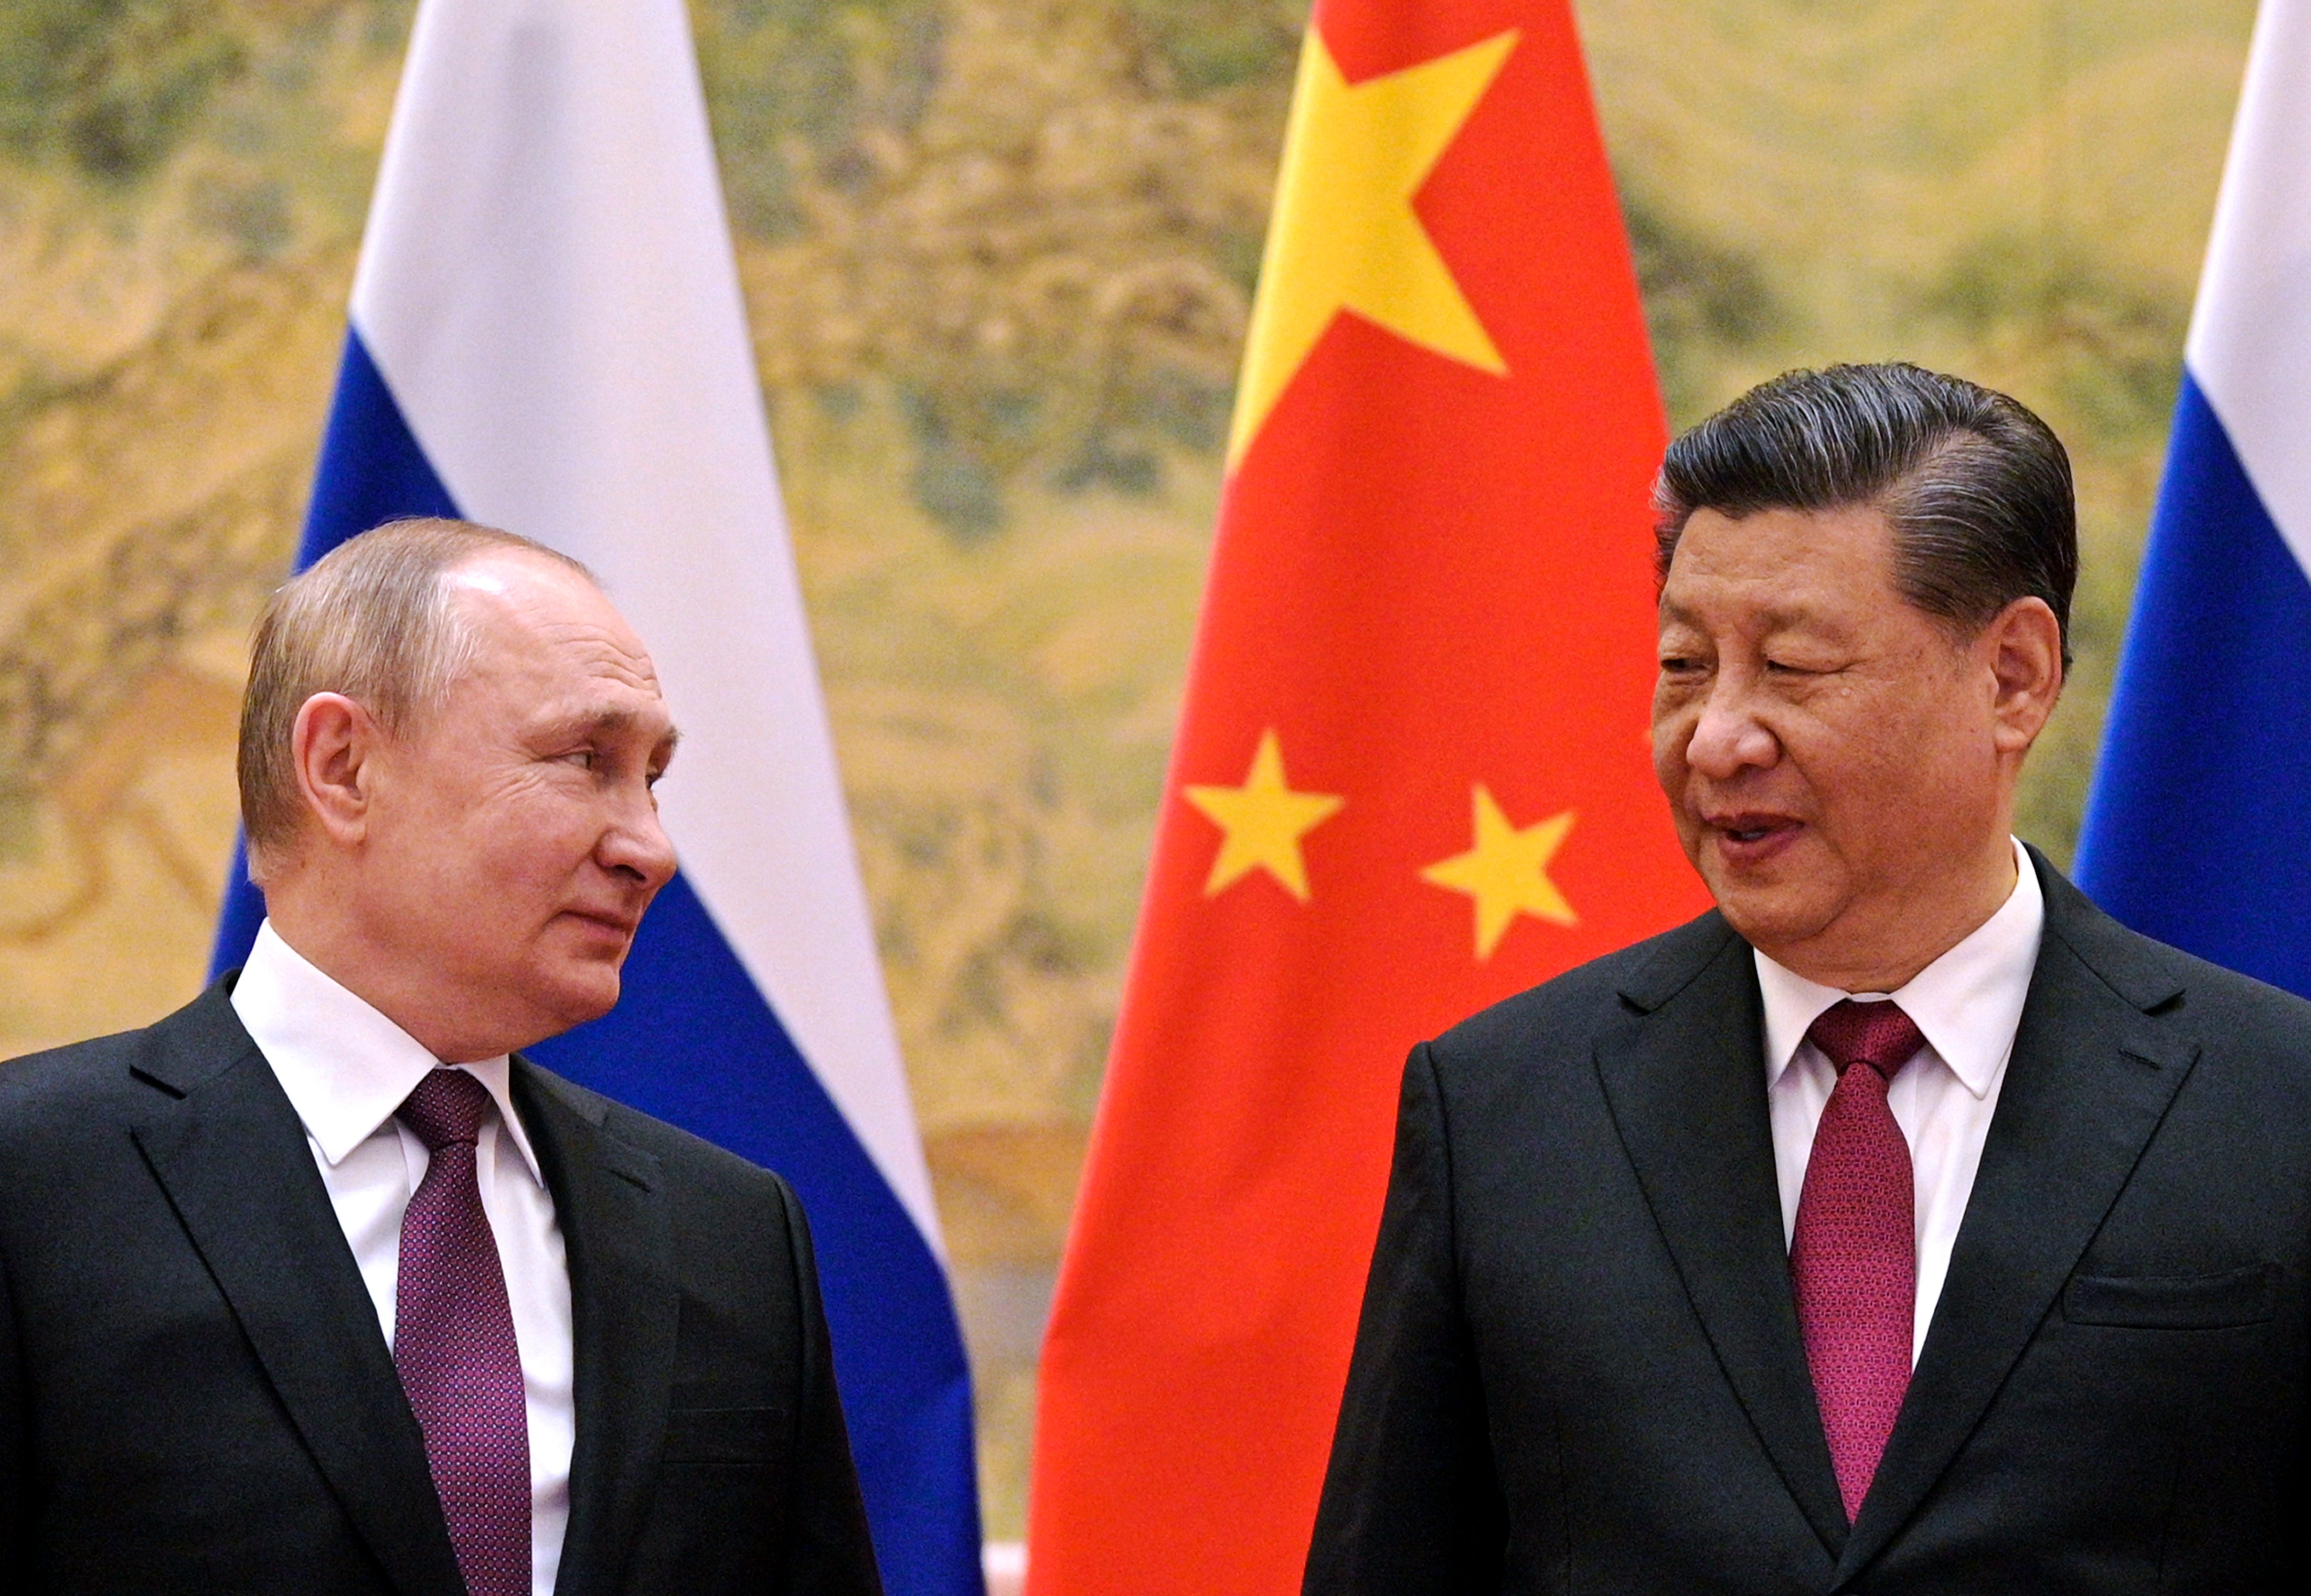 Putin and Xi will attened an ‘infomal dinner’ in Moscow on Monday